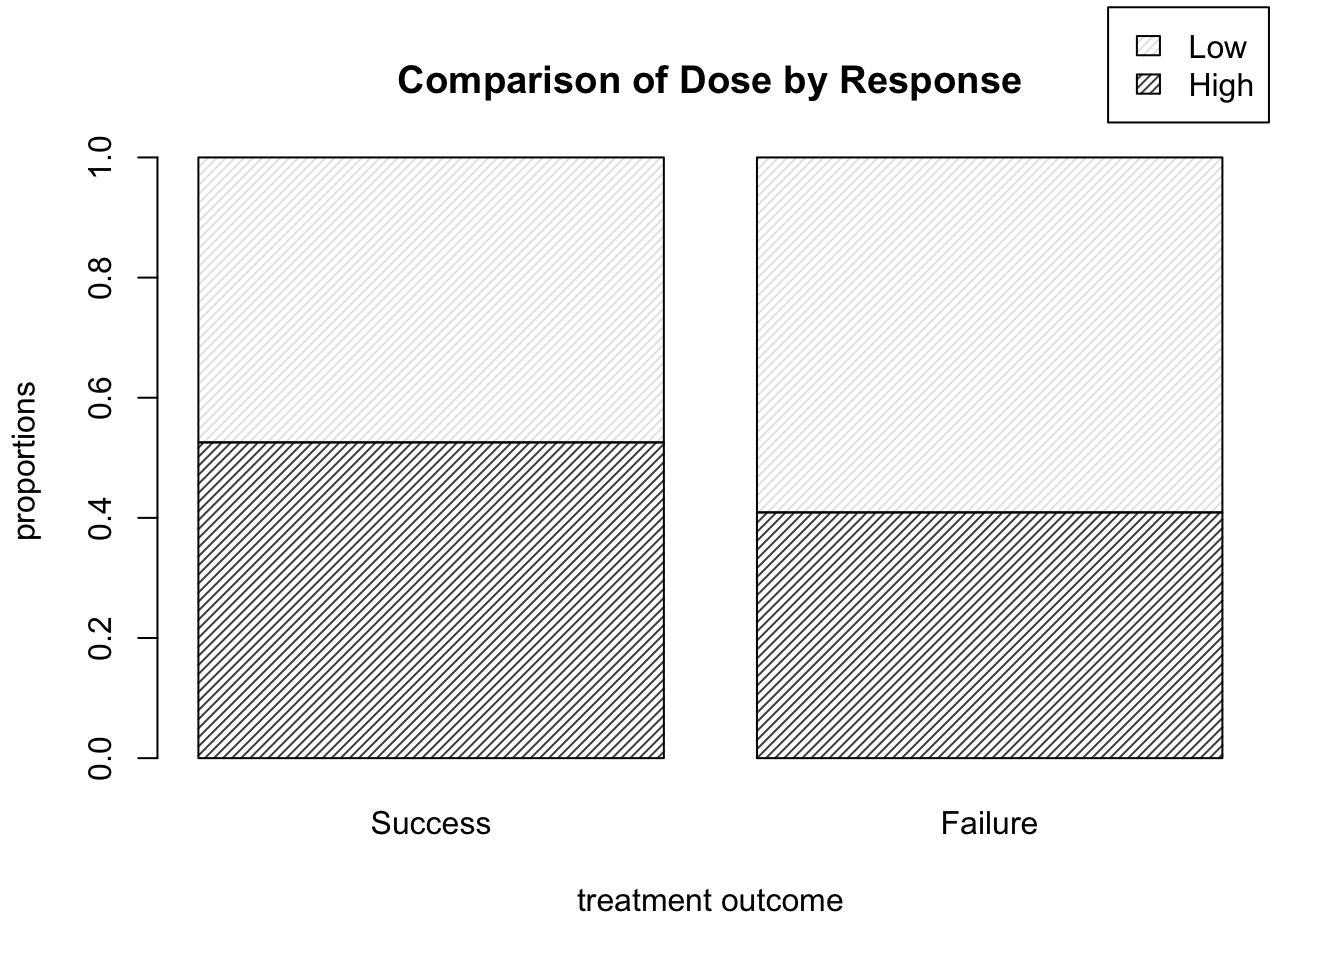 Barplots of dose level proportions corresponding to each treatment outcome.